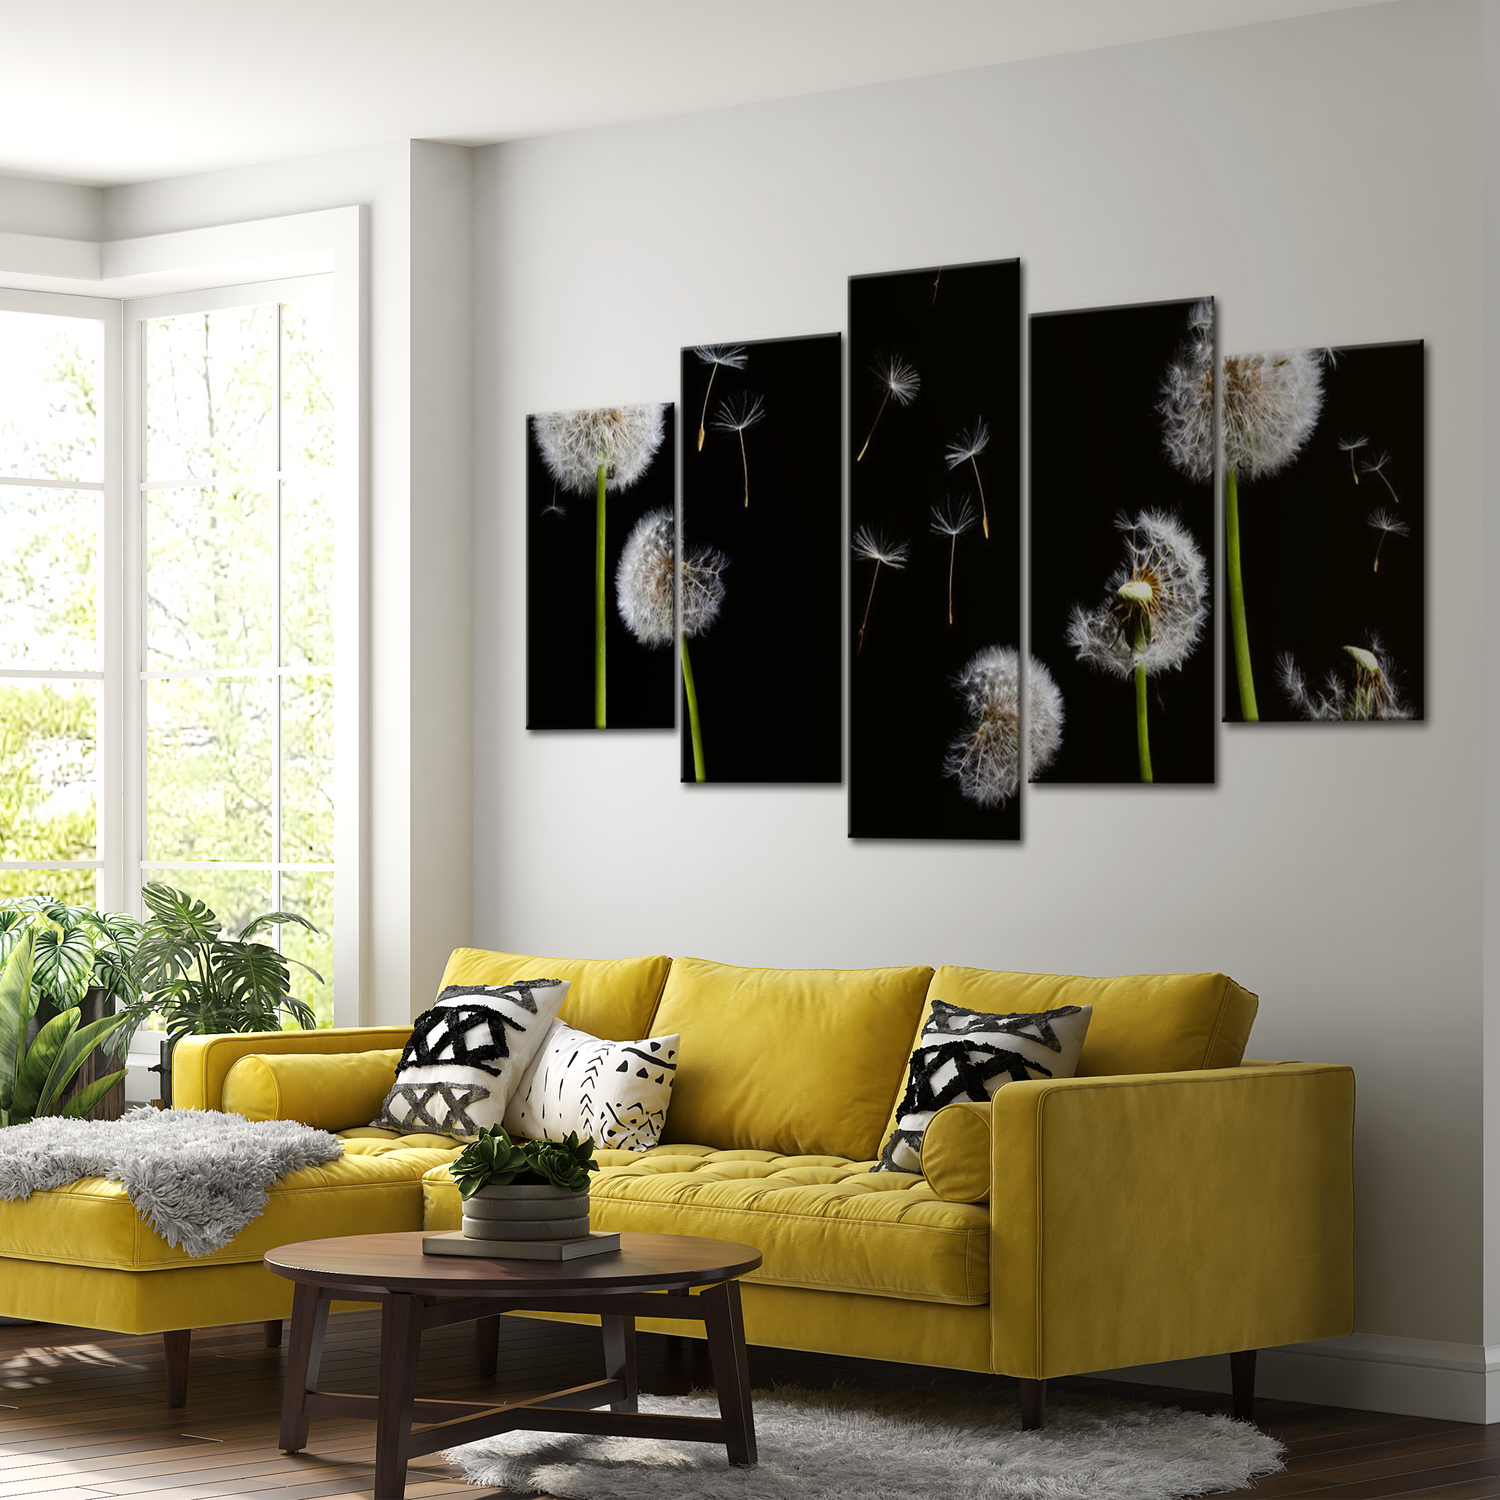 Stretched Canvas Floral Art - Dandelion- Towards Freedom 40"Wx20"H